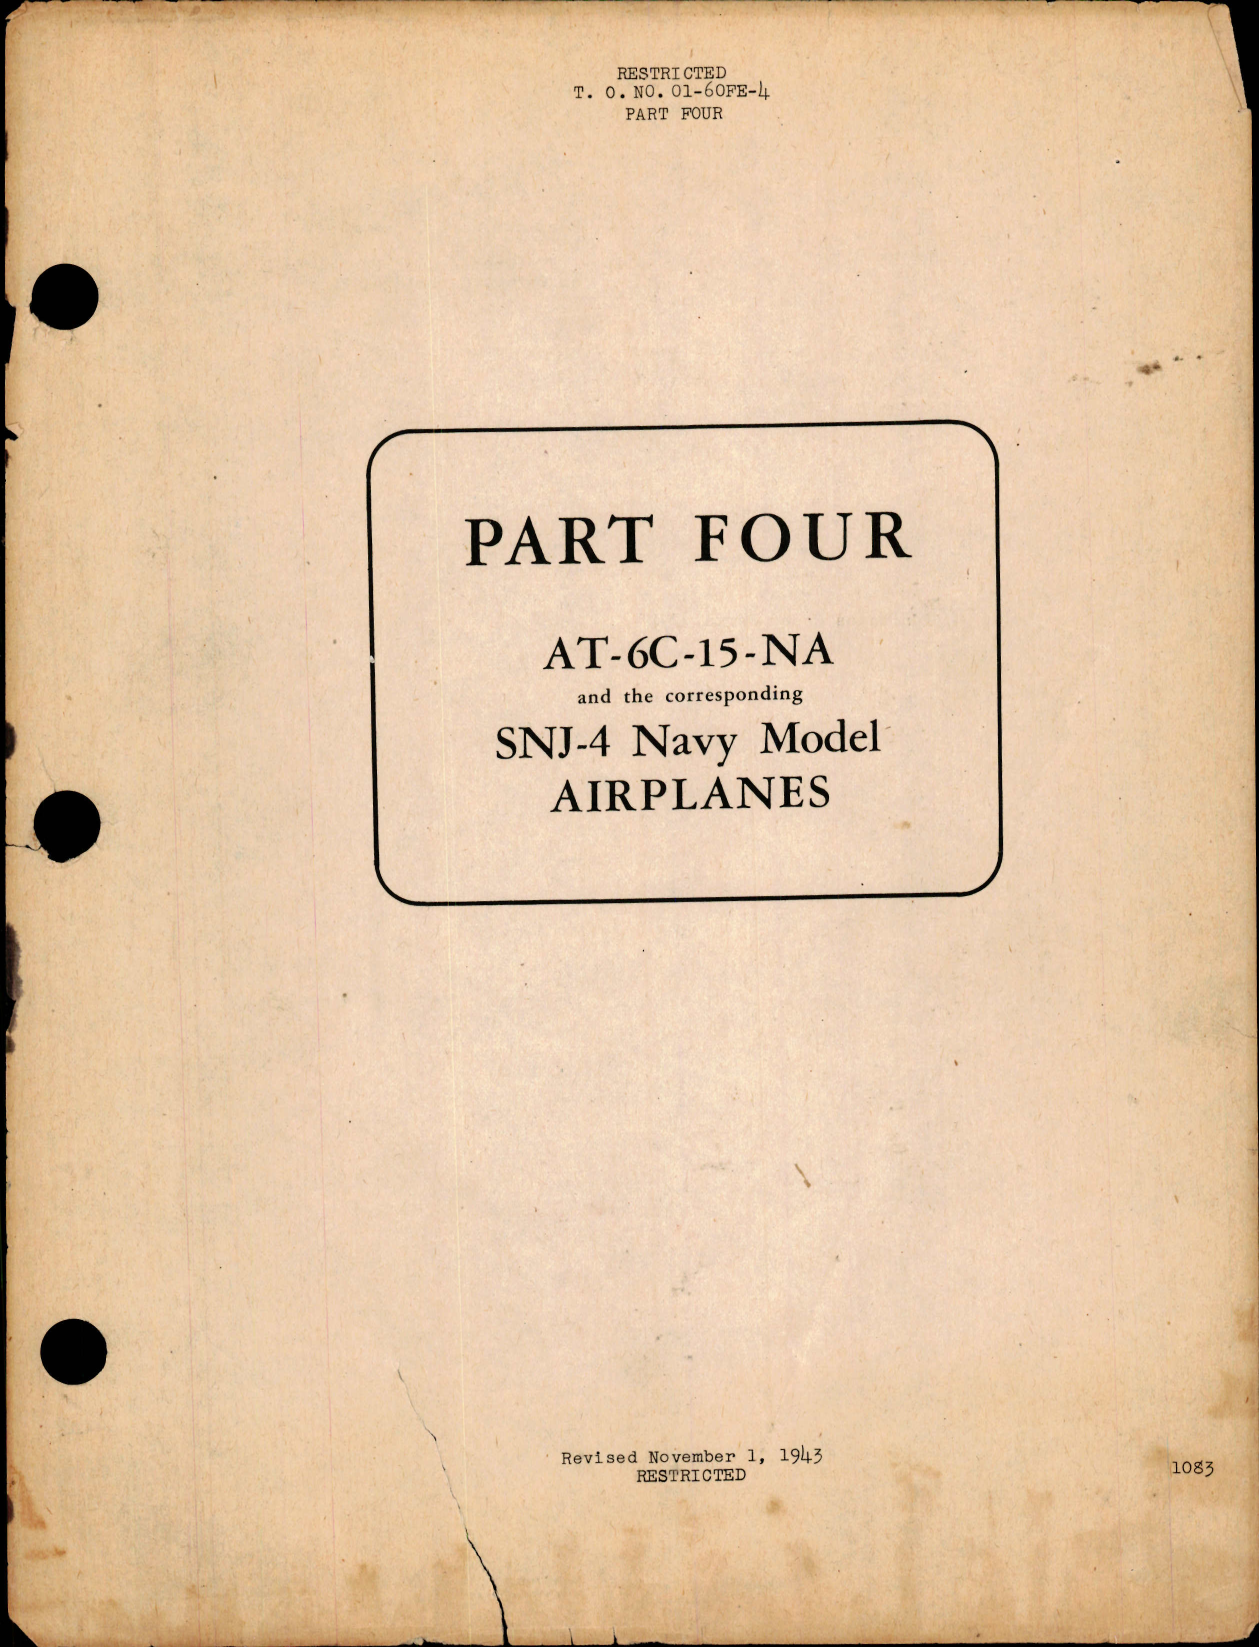 Sample page 1 from AirCorps Library document: Parts Catalog for AT-6C-15-NA and SNJ-4 (Part Four)